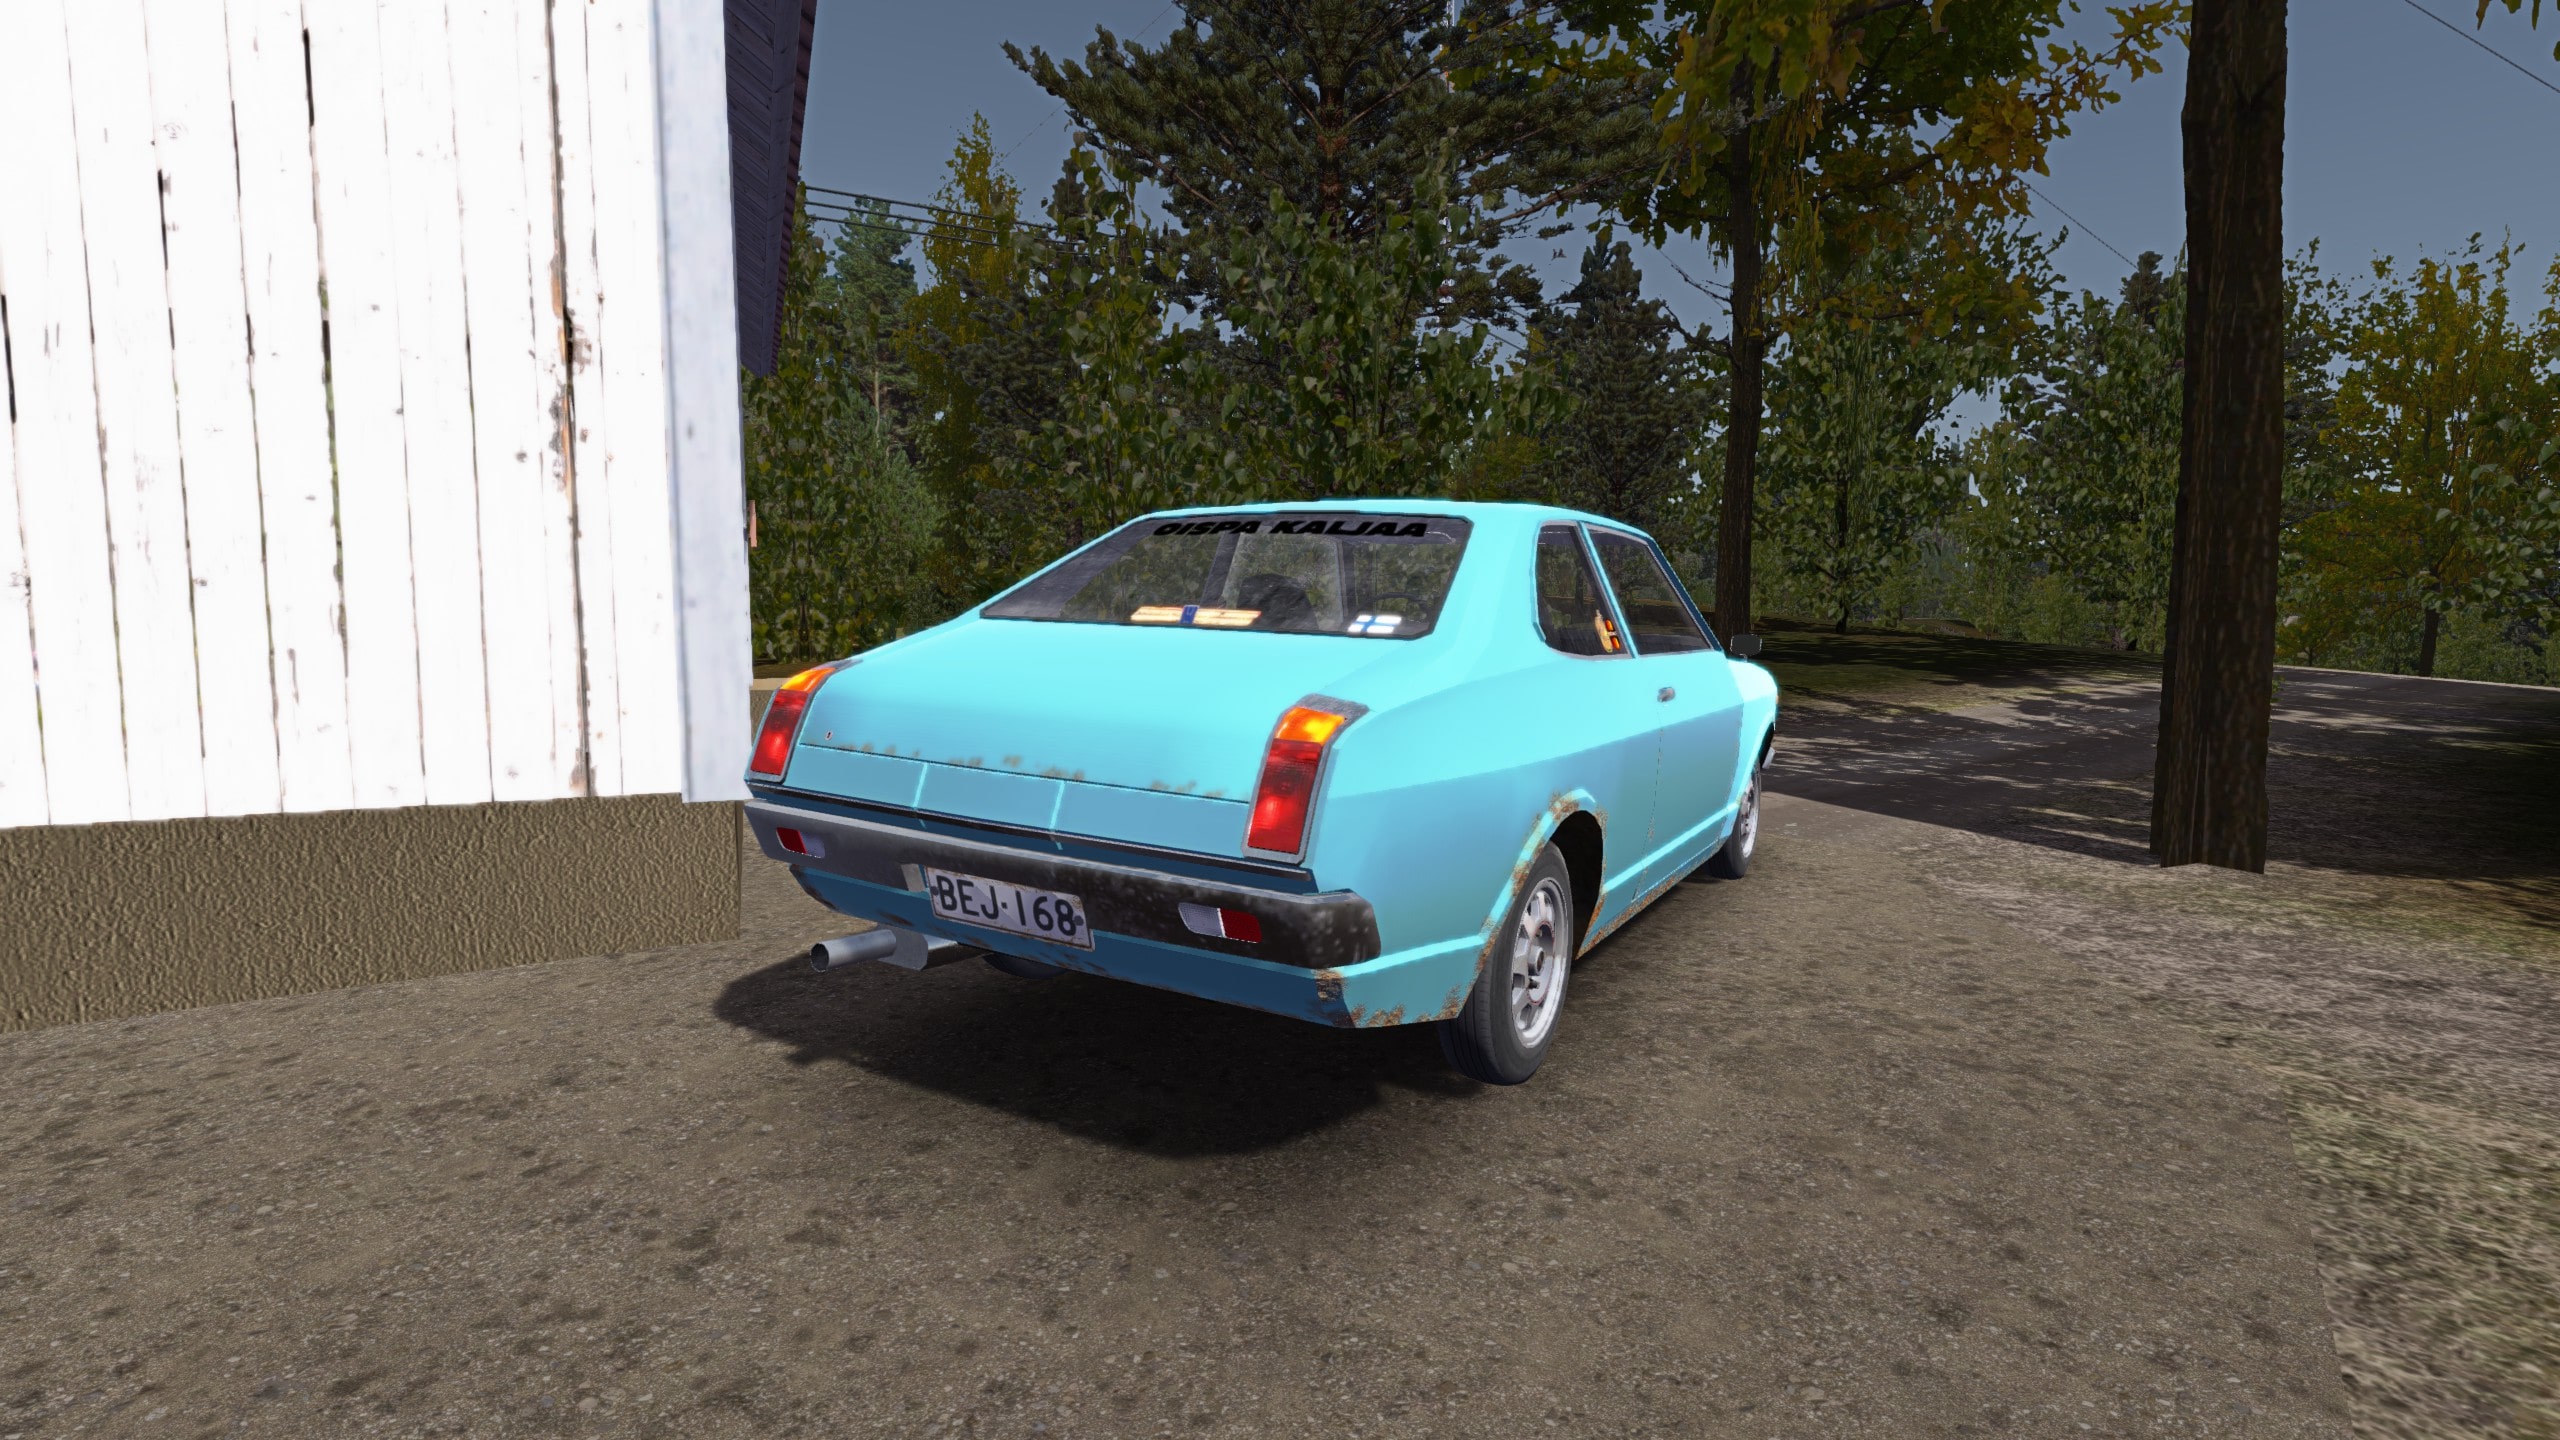 Mods for My Summer Car